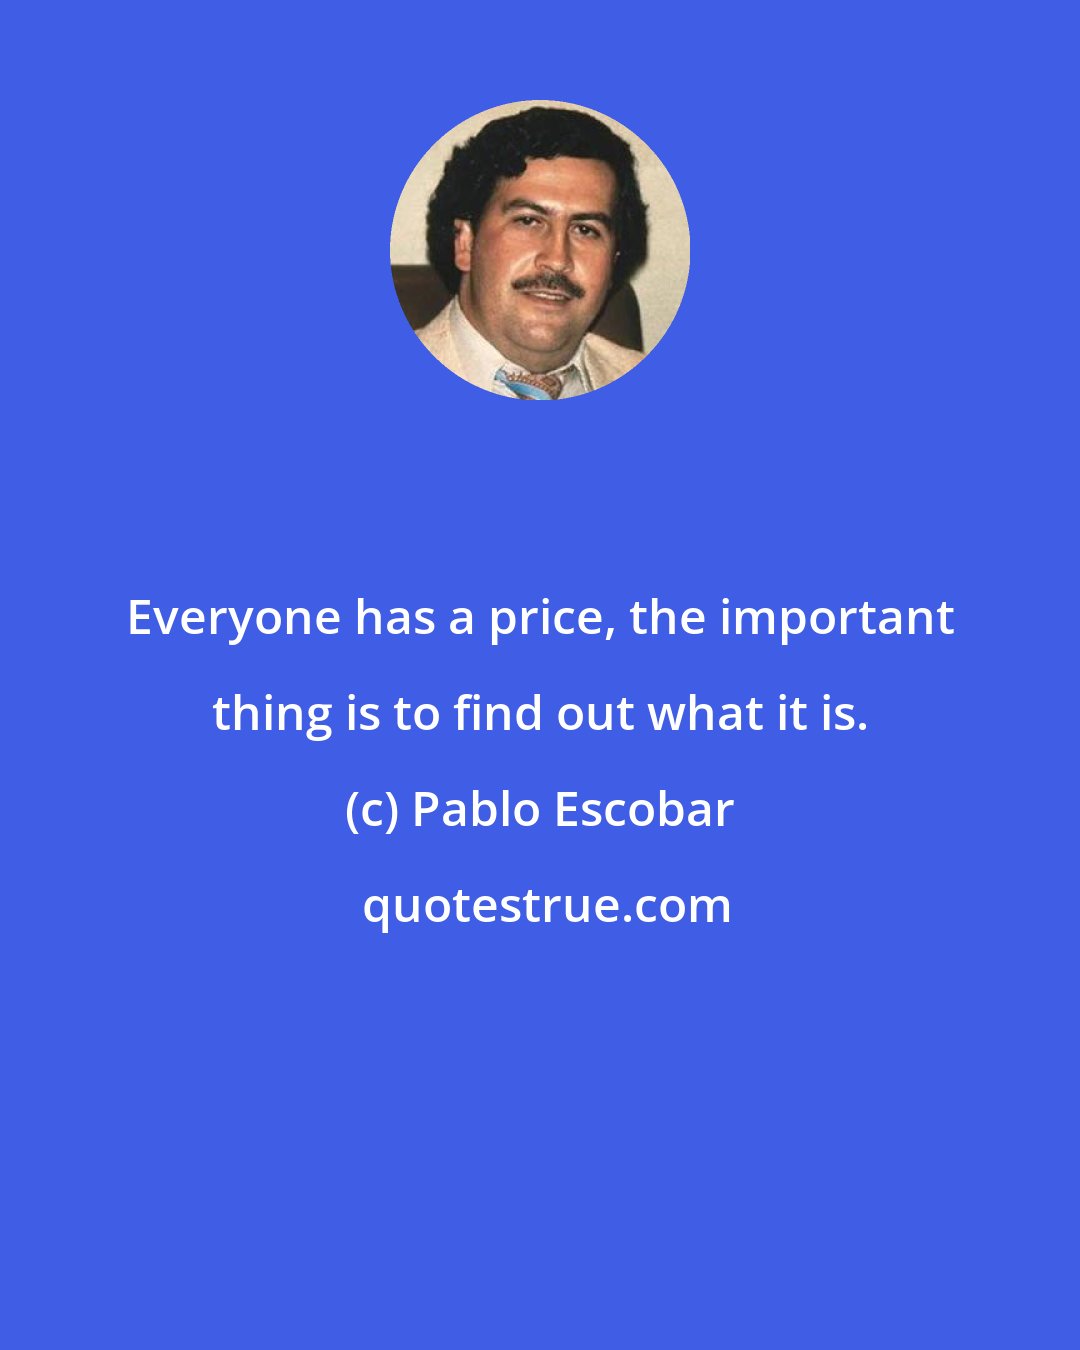 Pablo Escobar: Everyone has a price, the important thing is to find out what it is.